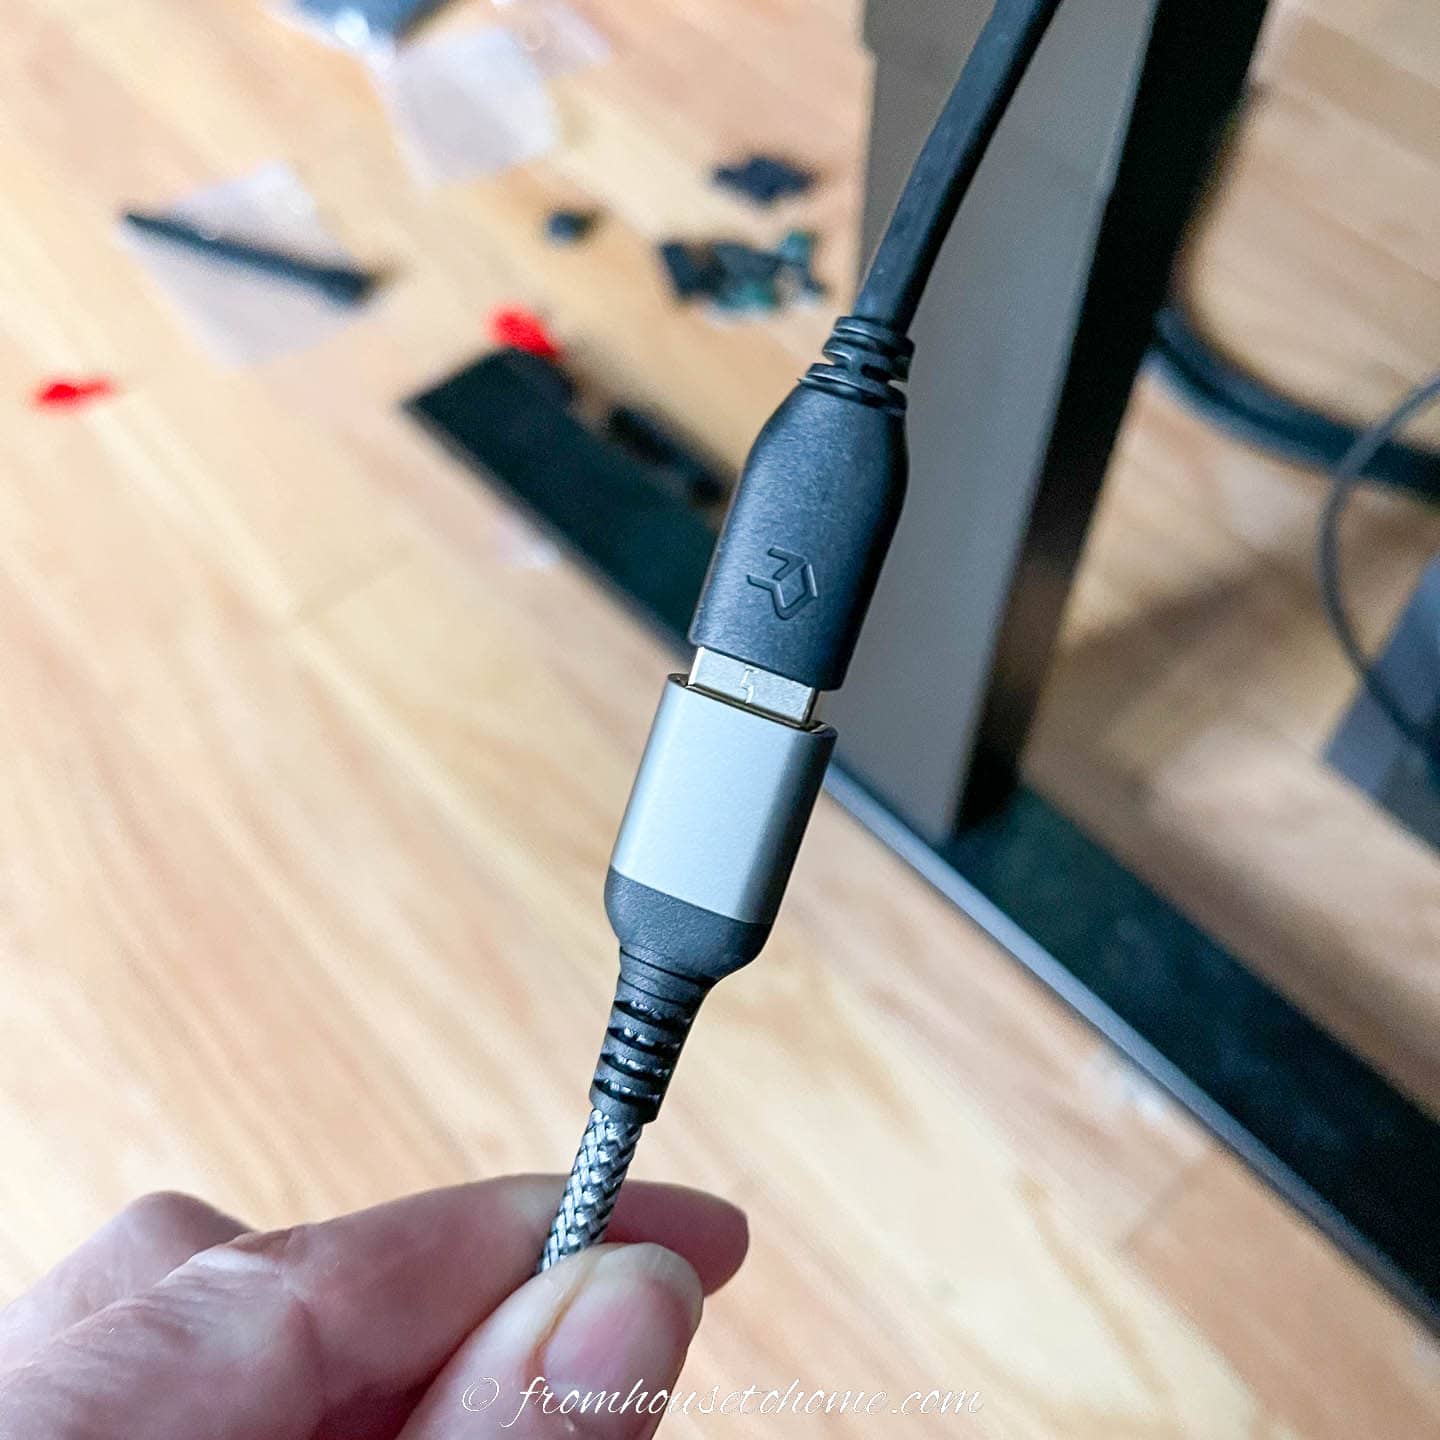 USB extension cable attached to a USB cable